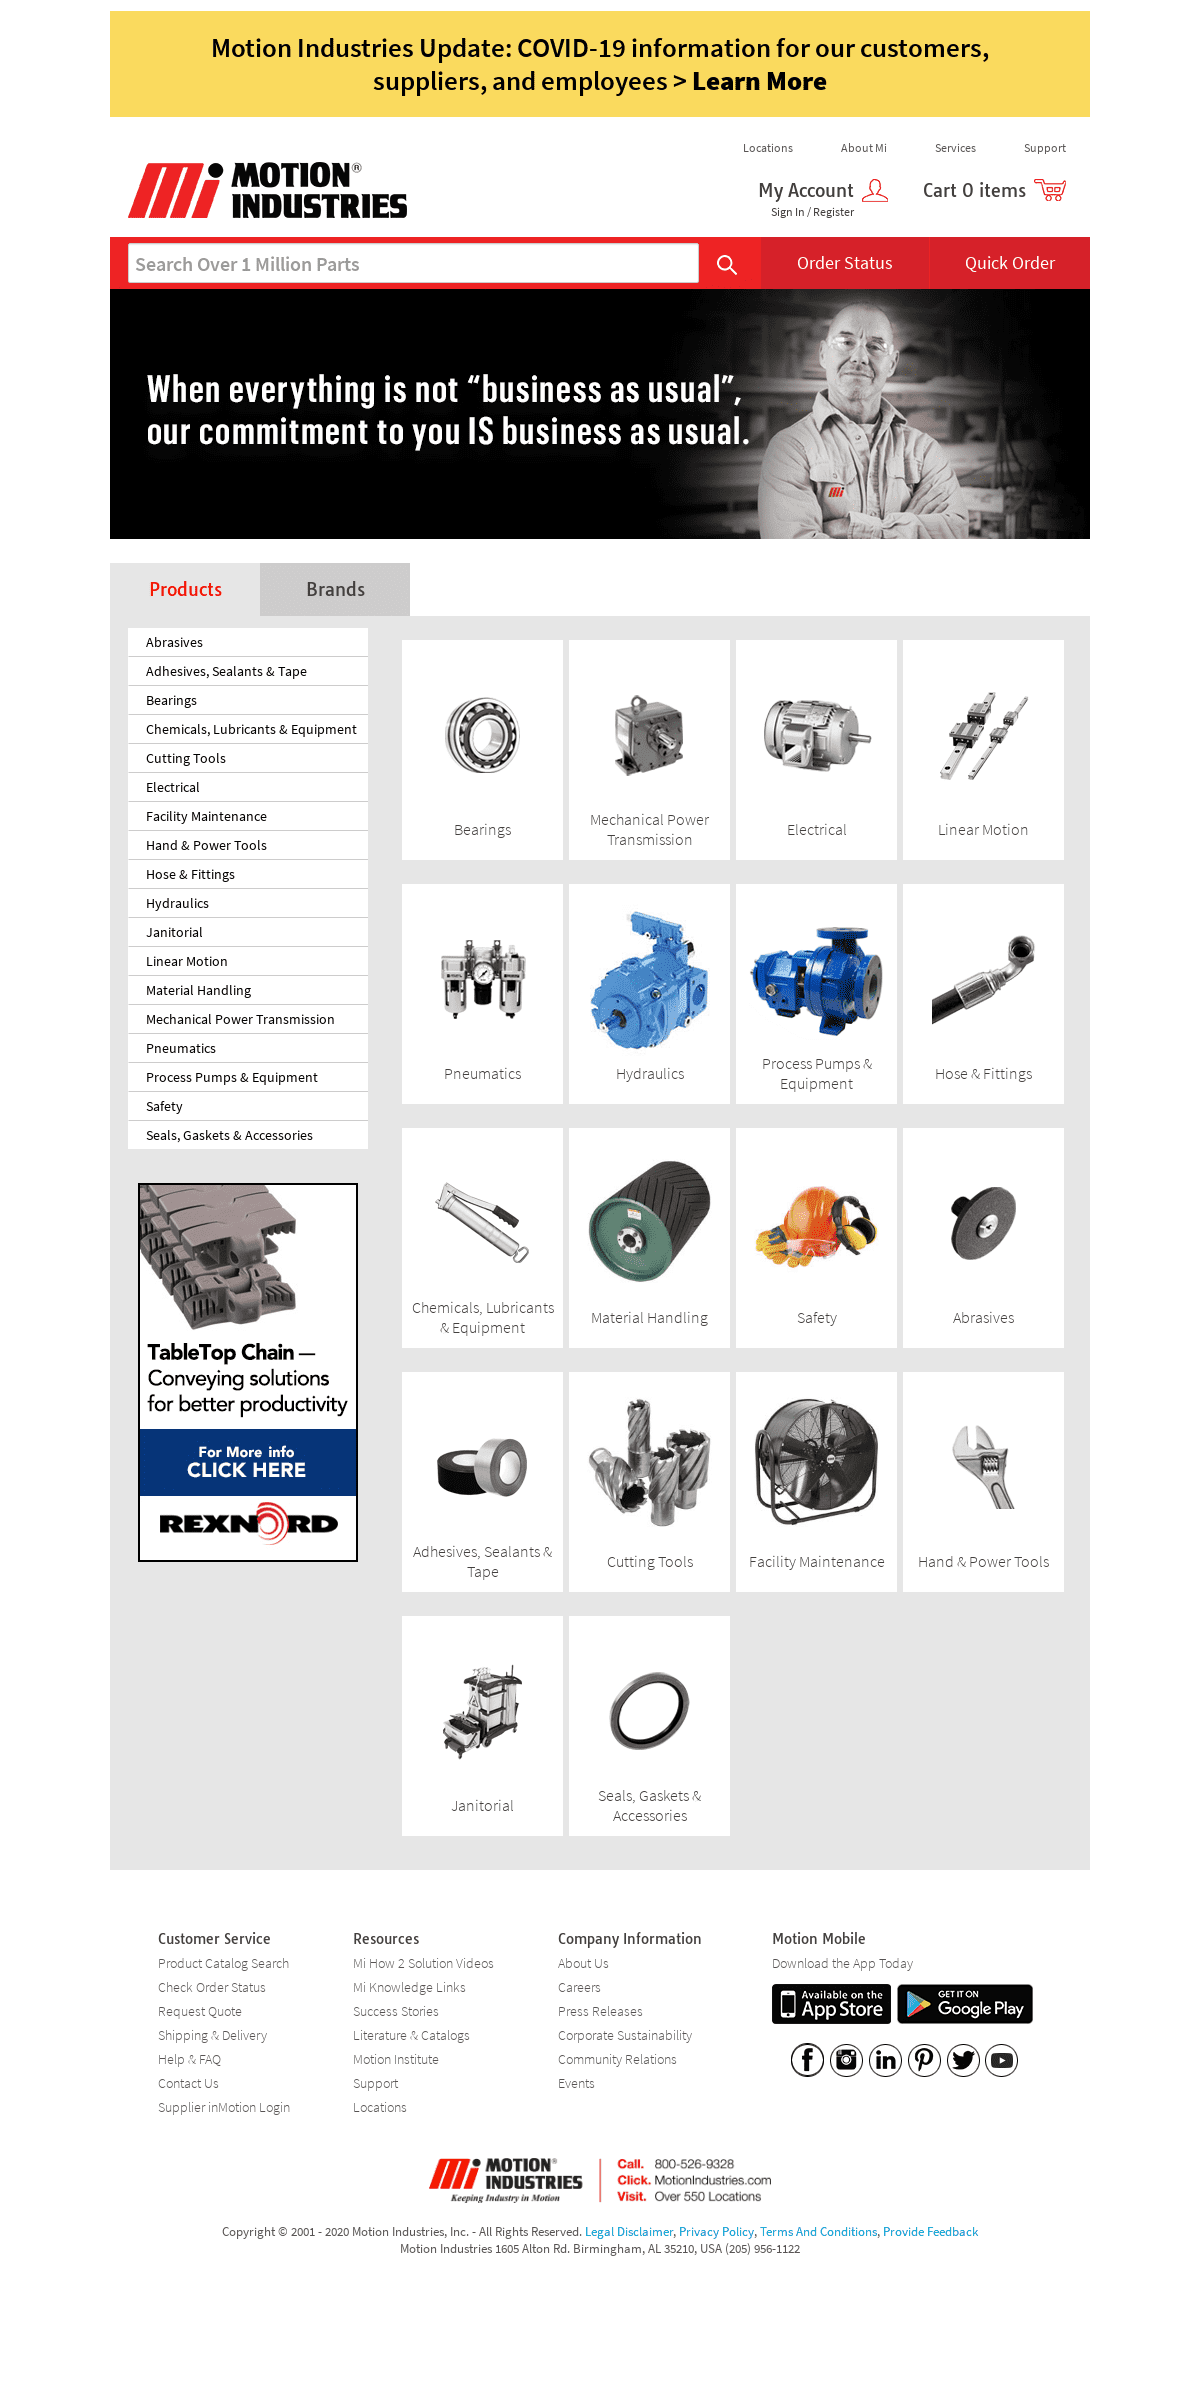 A complete backup of motionindustries.com